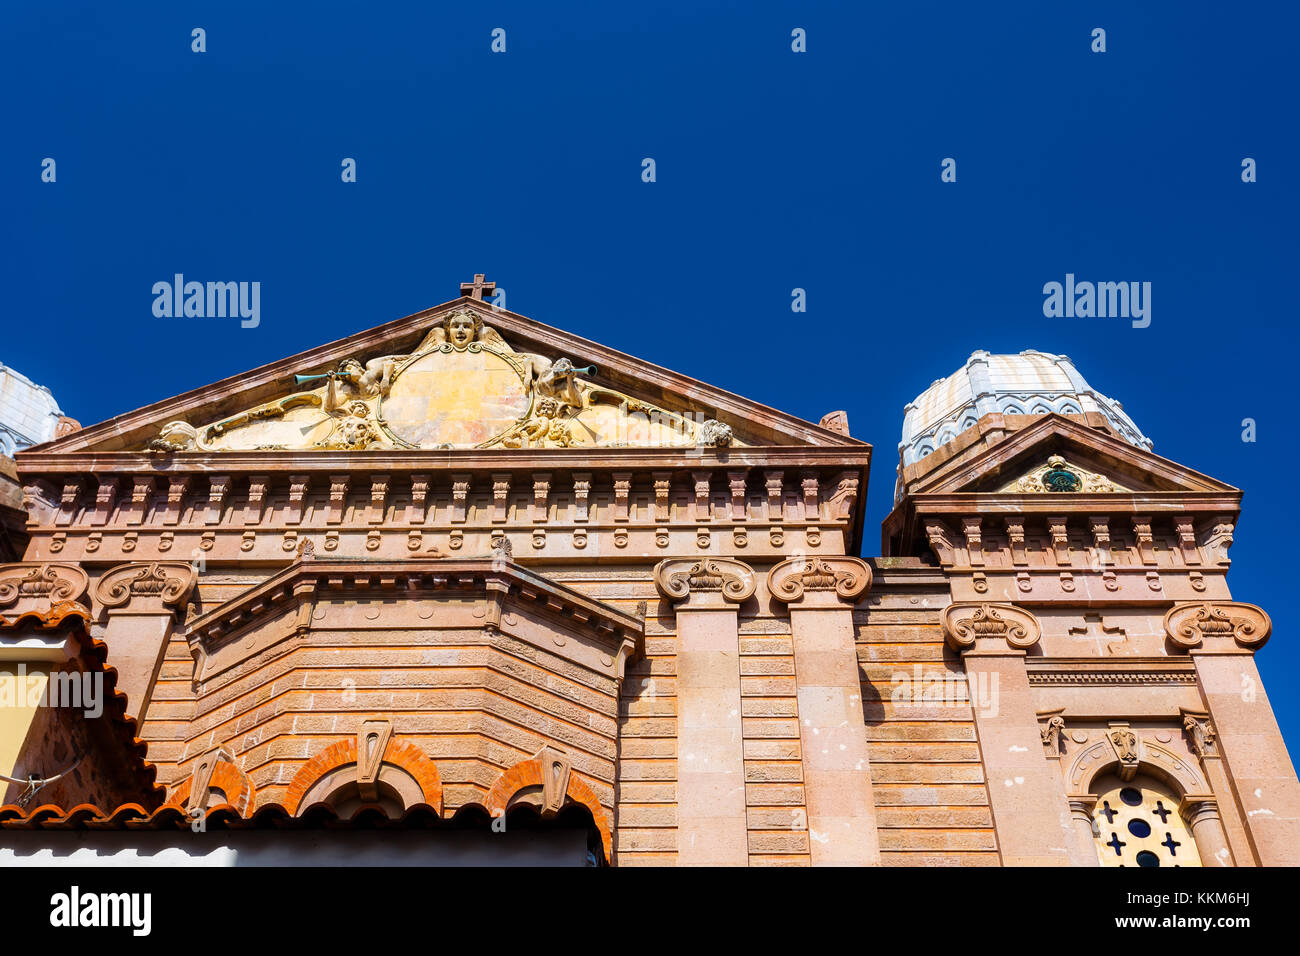 St Therapontas cathedral temple architectural details in the morning, against a clear sky in Mytilene, Lesvos island, Greece Stock Photo